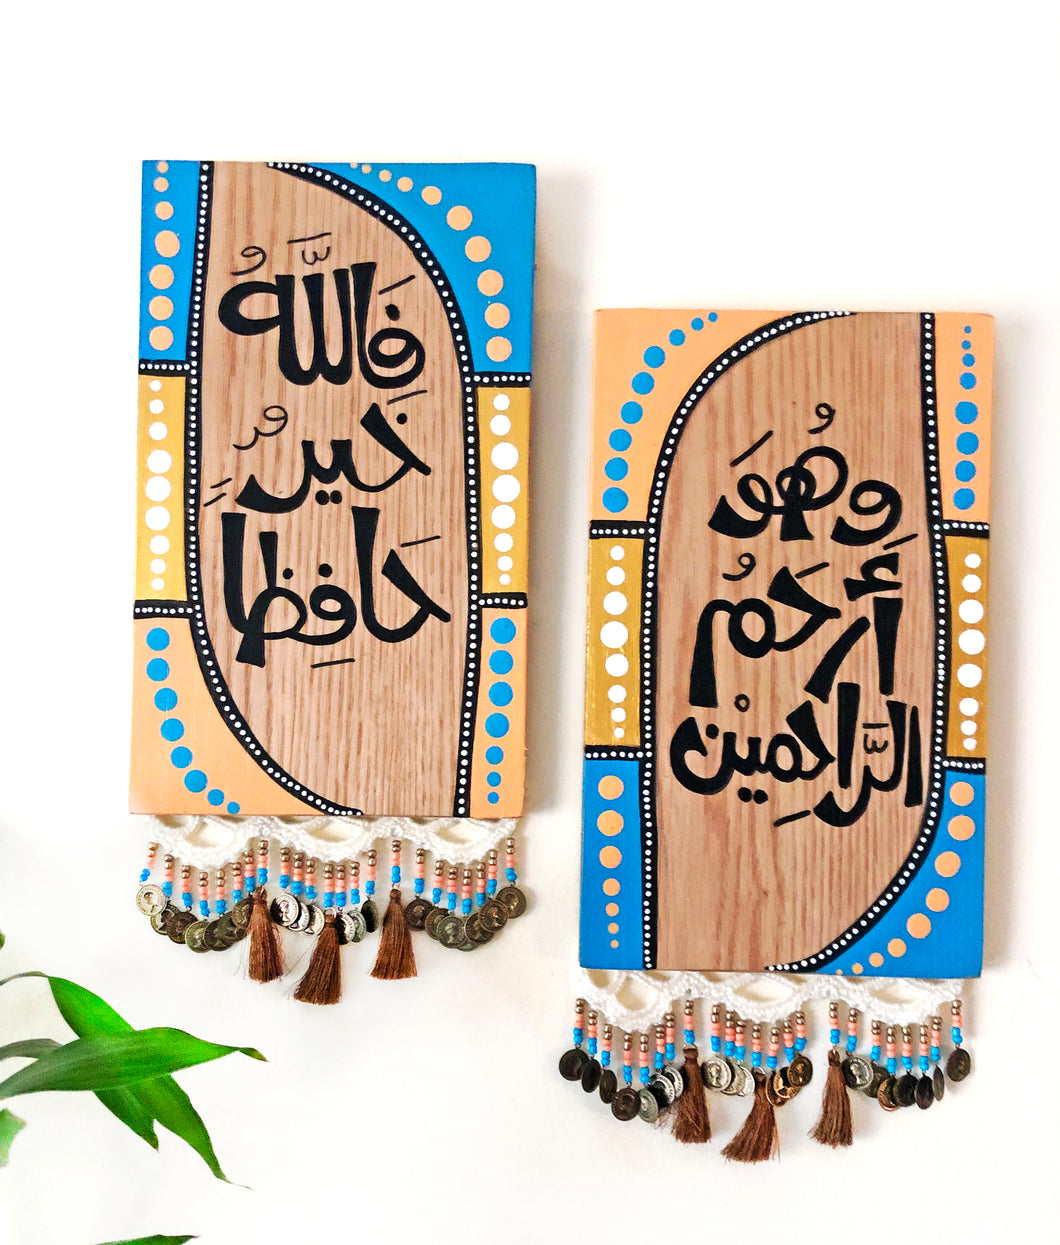 Set of 2 Handmade Wooden Wall Decorations in Earth Tones with Arabic Calligraphy